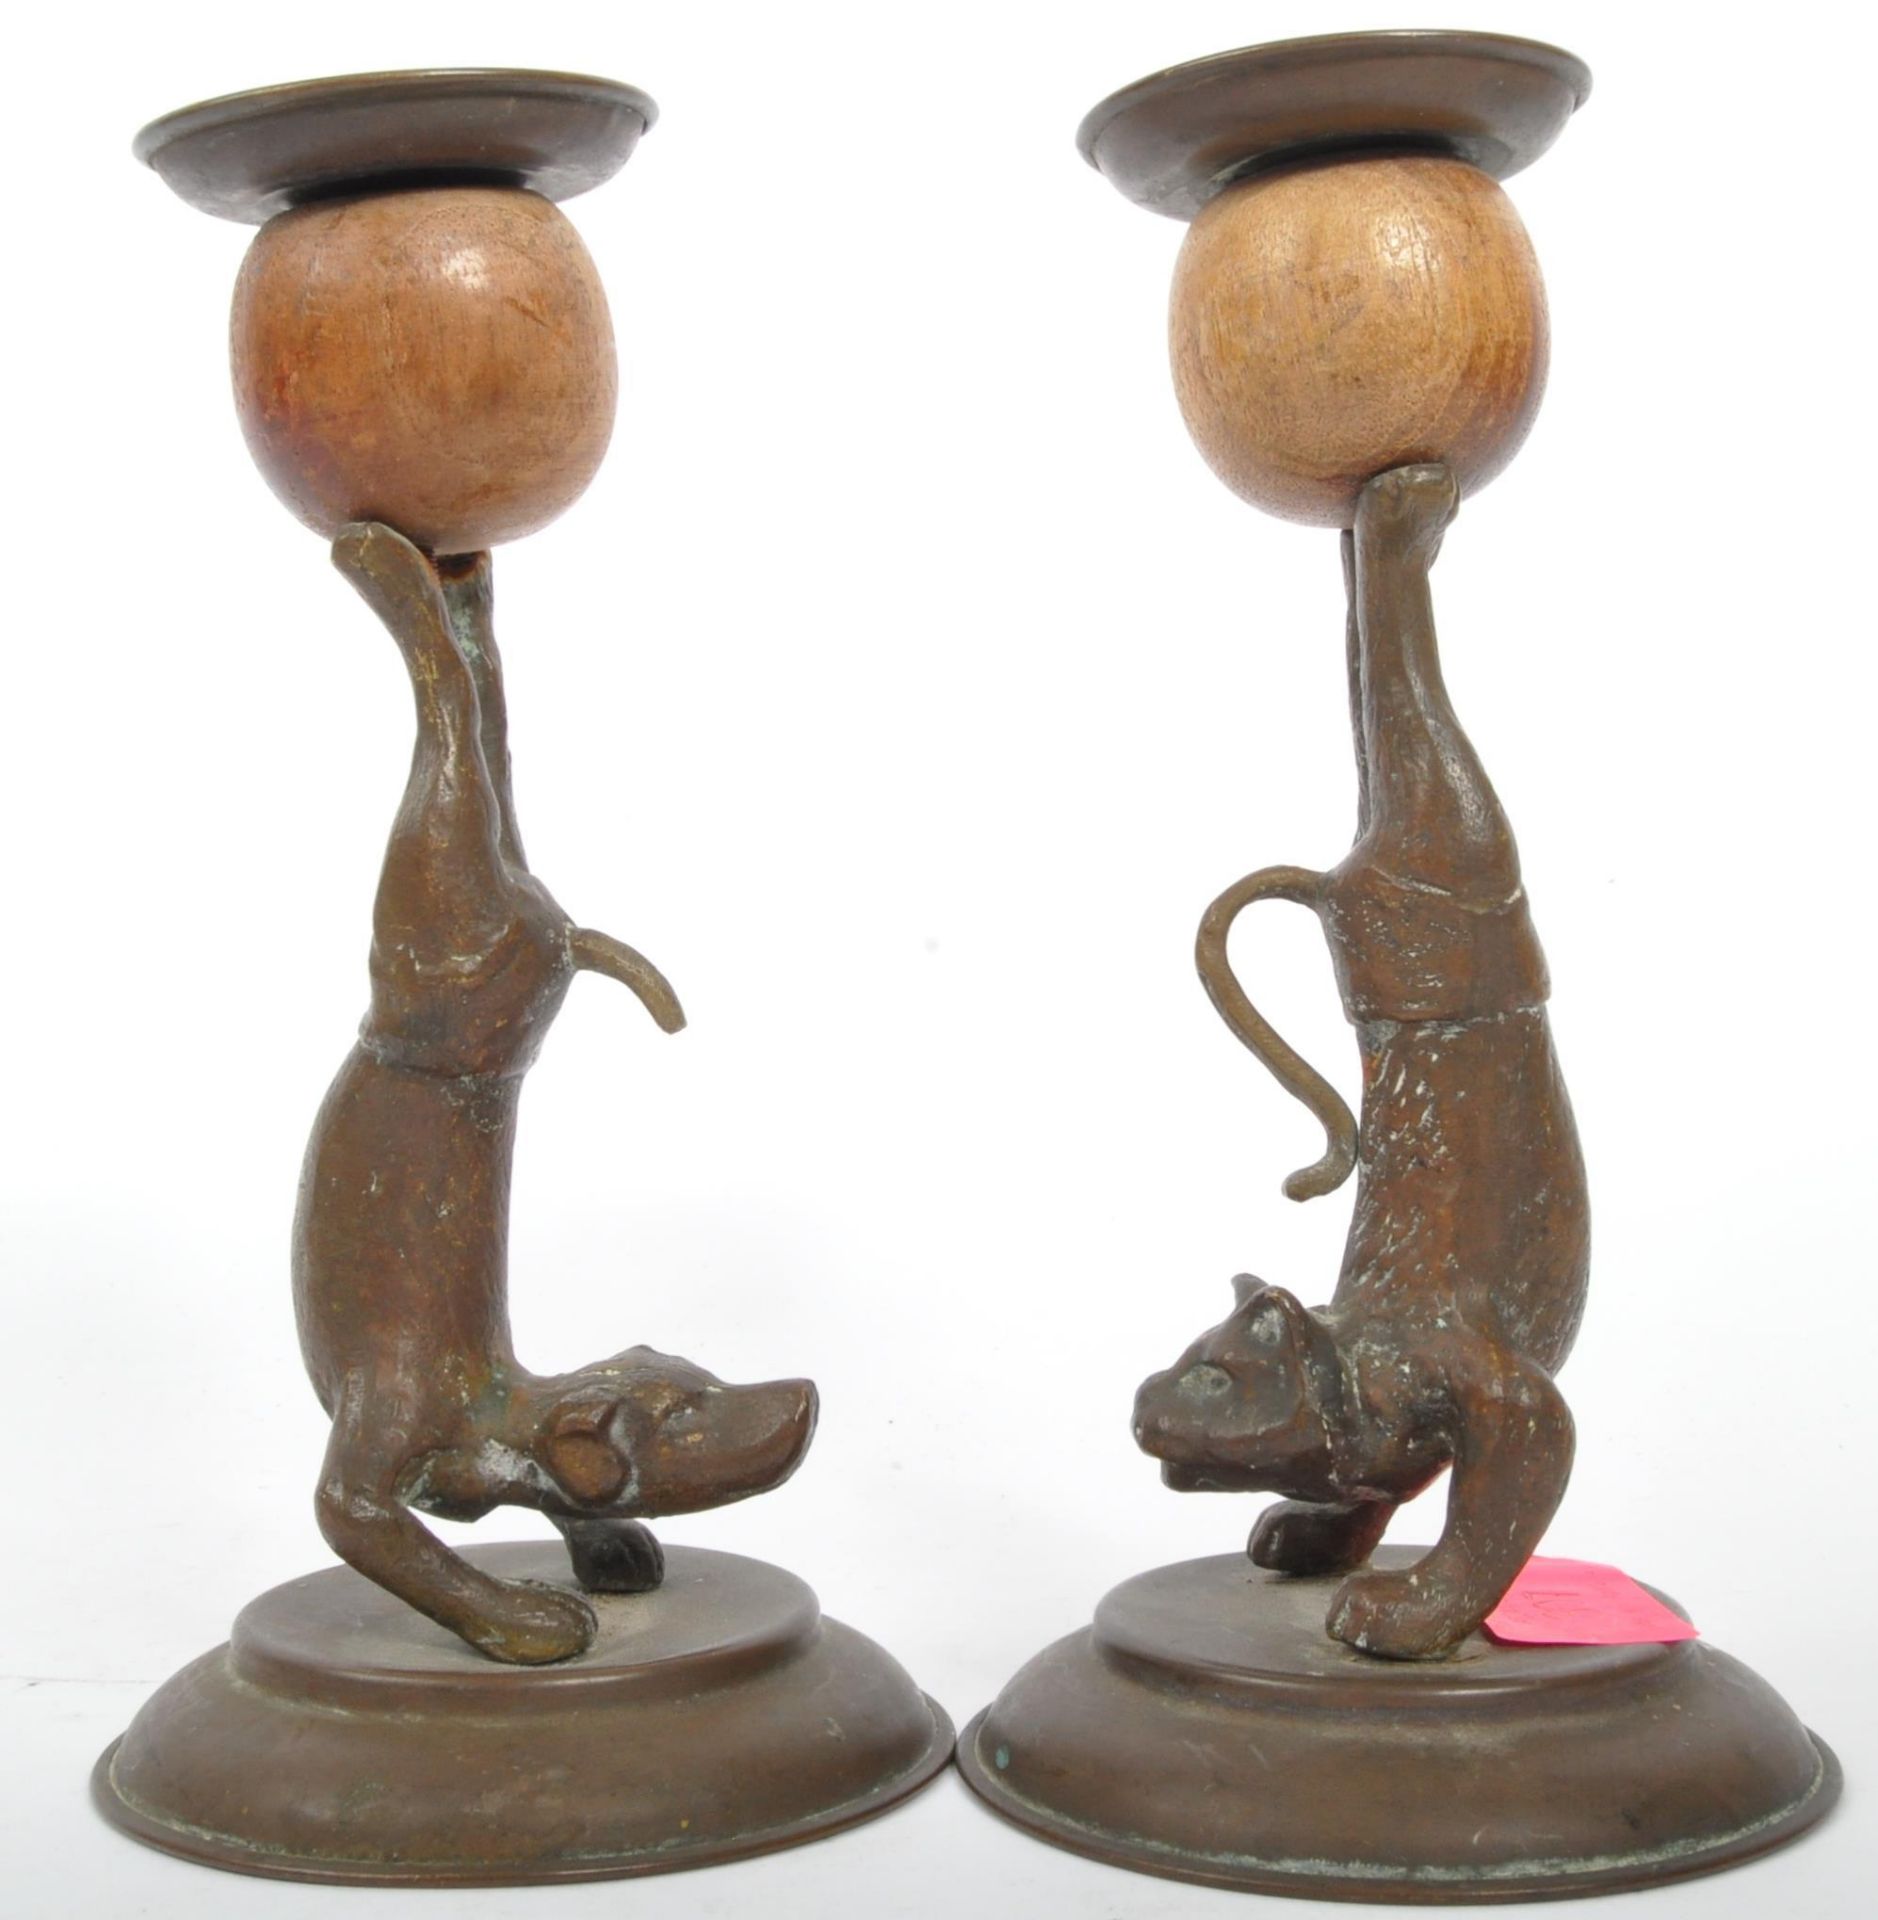 PAIR OF VINTAGE CIRCA 1970S ANIMAL CANDLE STICK HOLDERS - Image 4 of 5